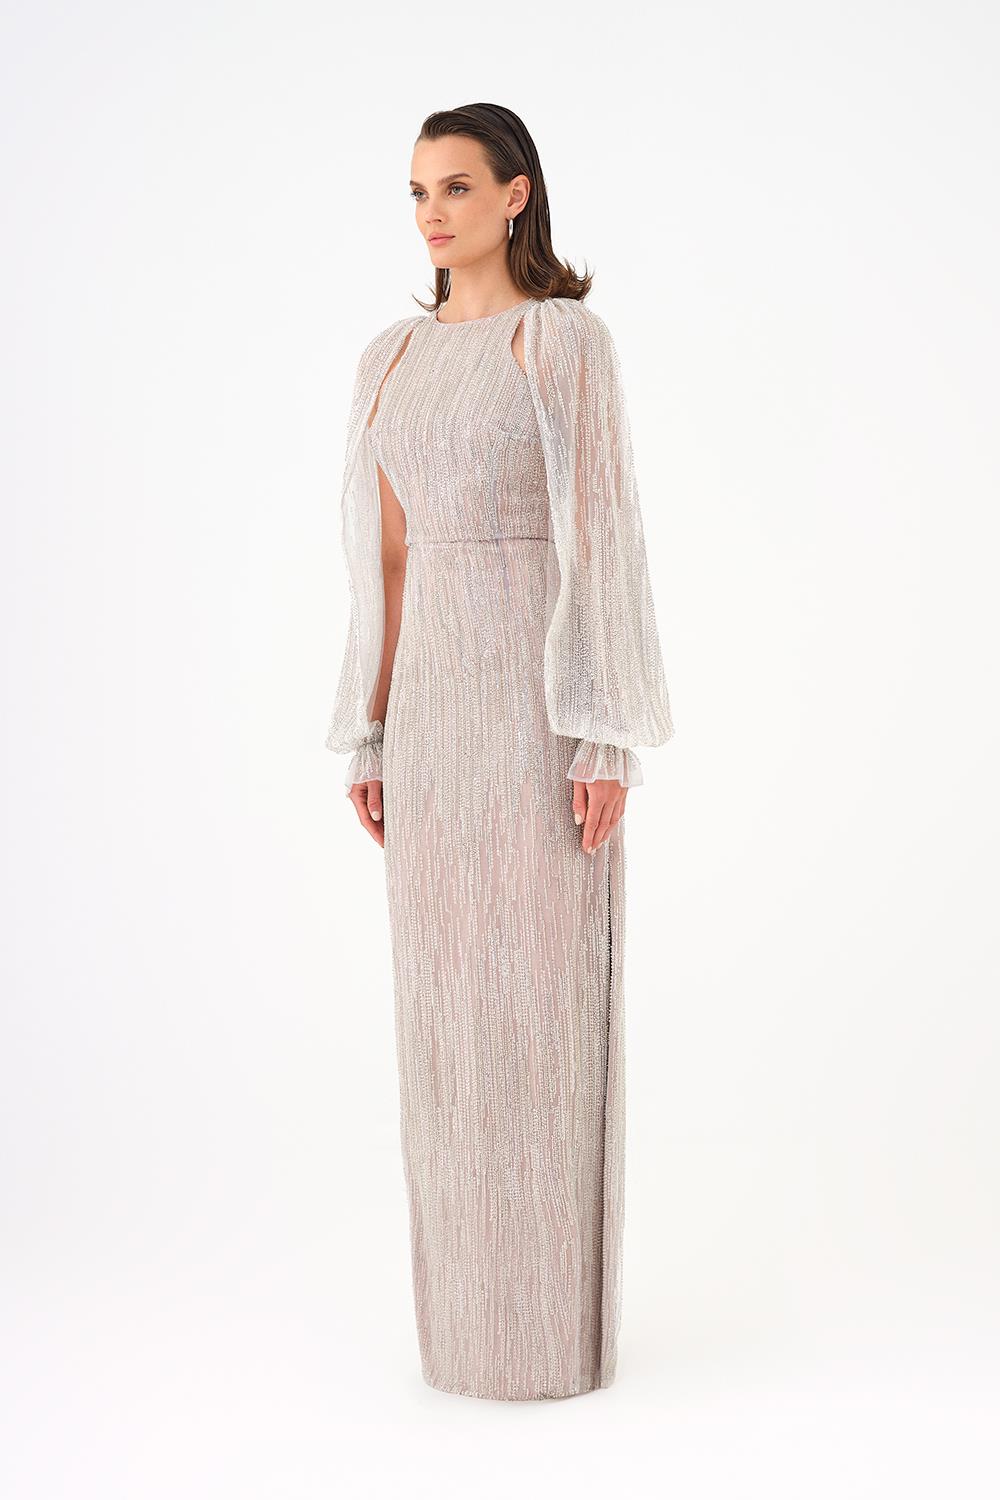 Chiffon Sleeve Detailed Stone Embroidered Long Evening Dress